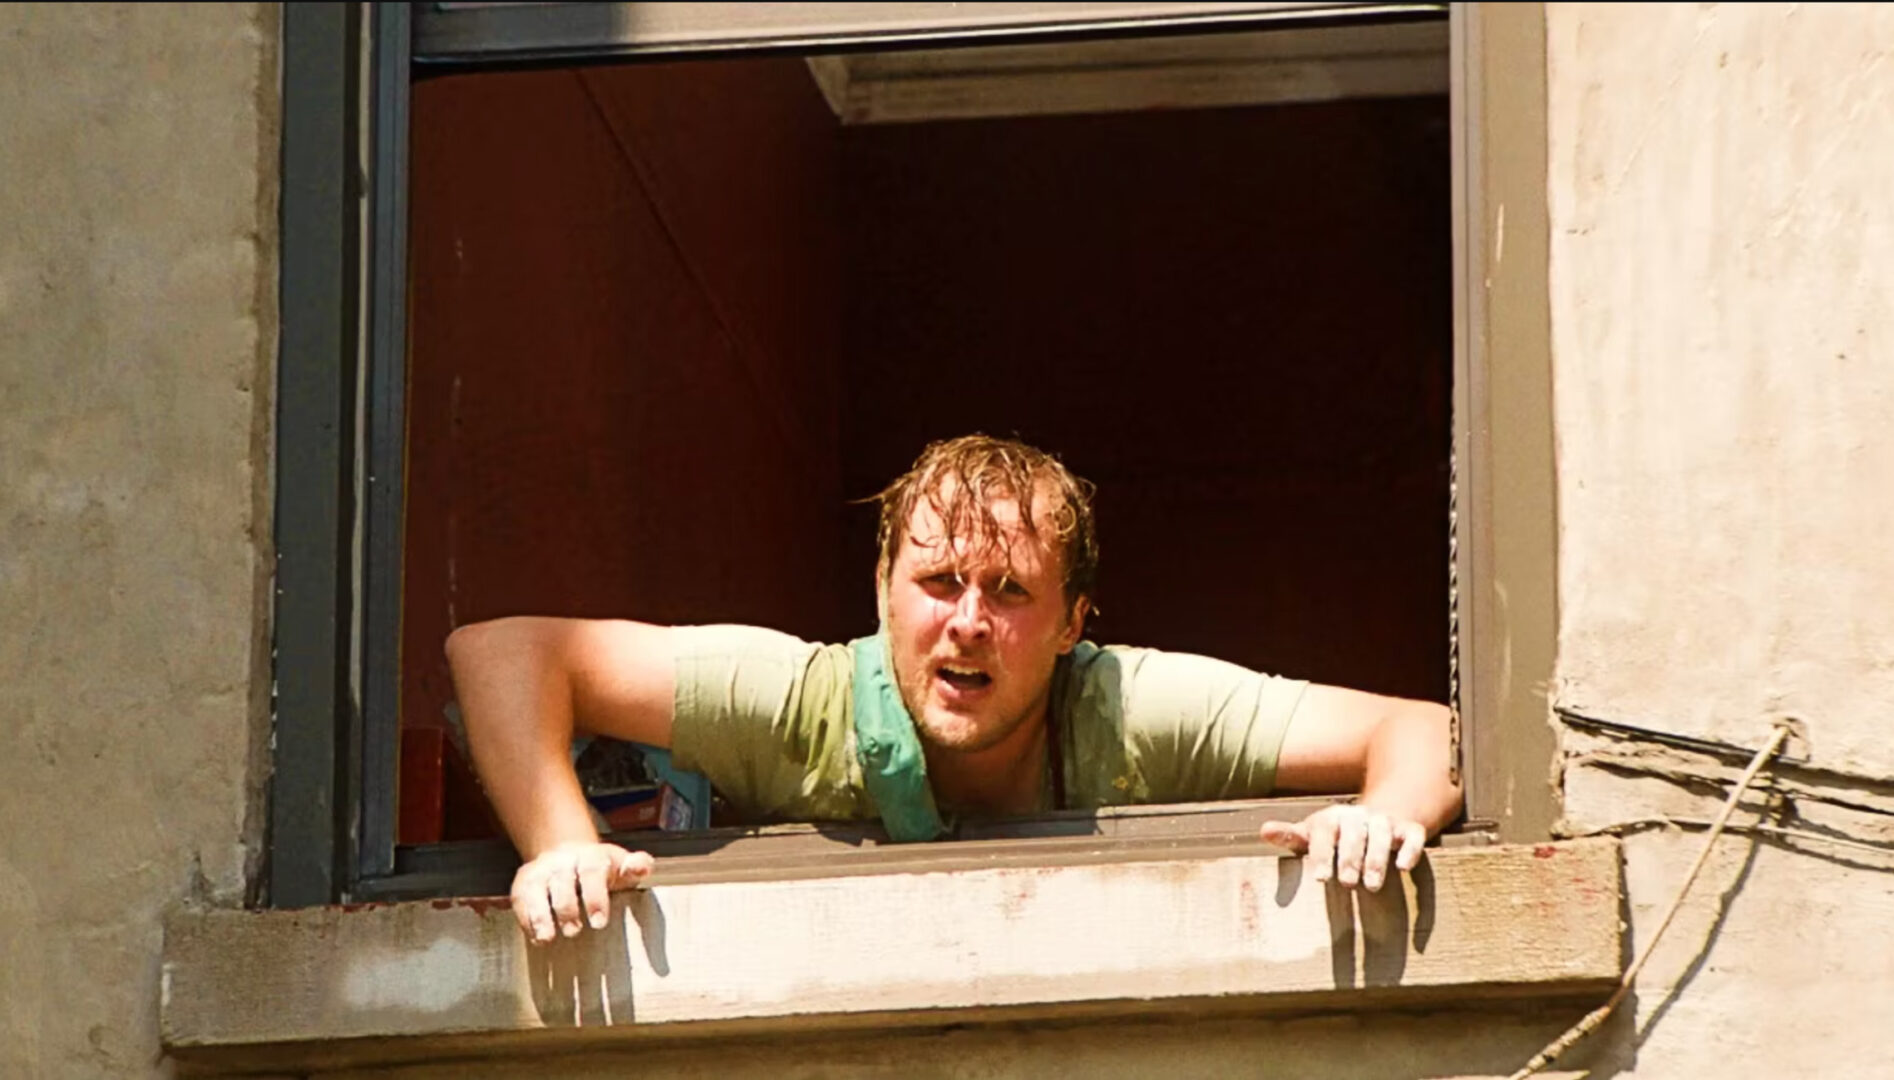 A man with red short hair hanging out a window